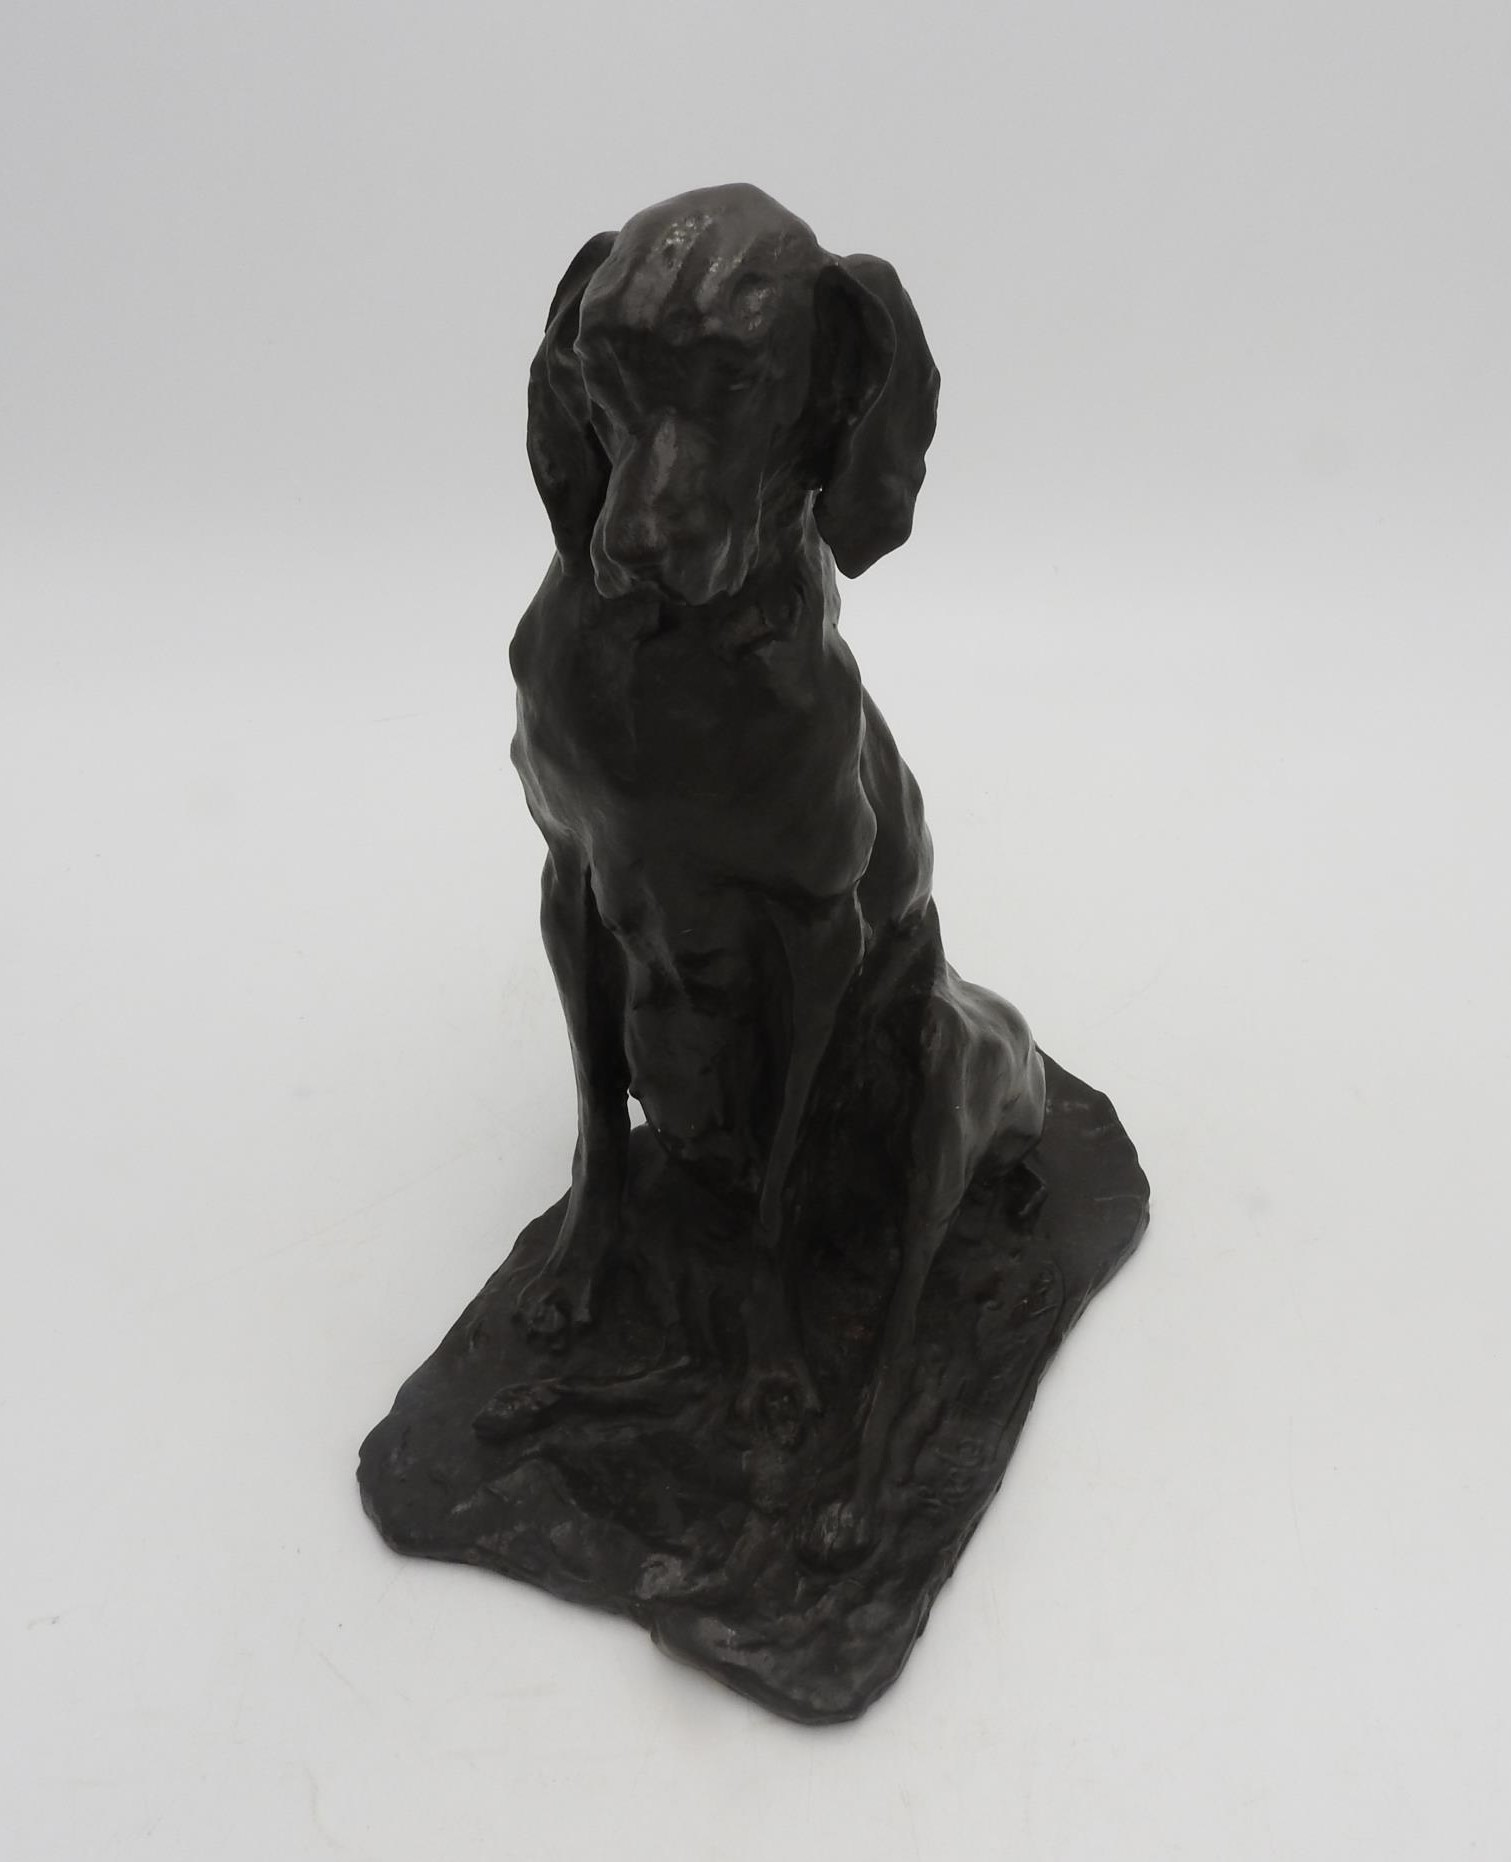 A BRONZE FIGURE OF SEATED DOG SIGNED AND DATED PAOLO TROUBETZKOY 1893, dark brown patina, 25 cm high